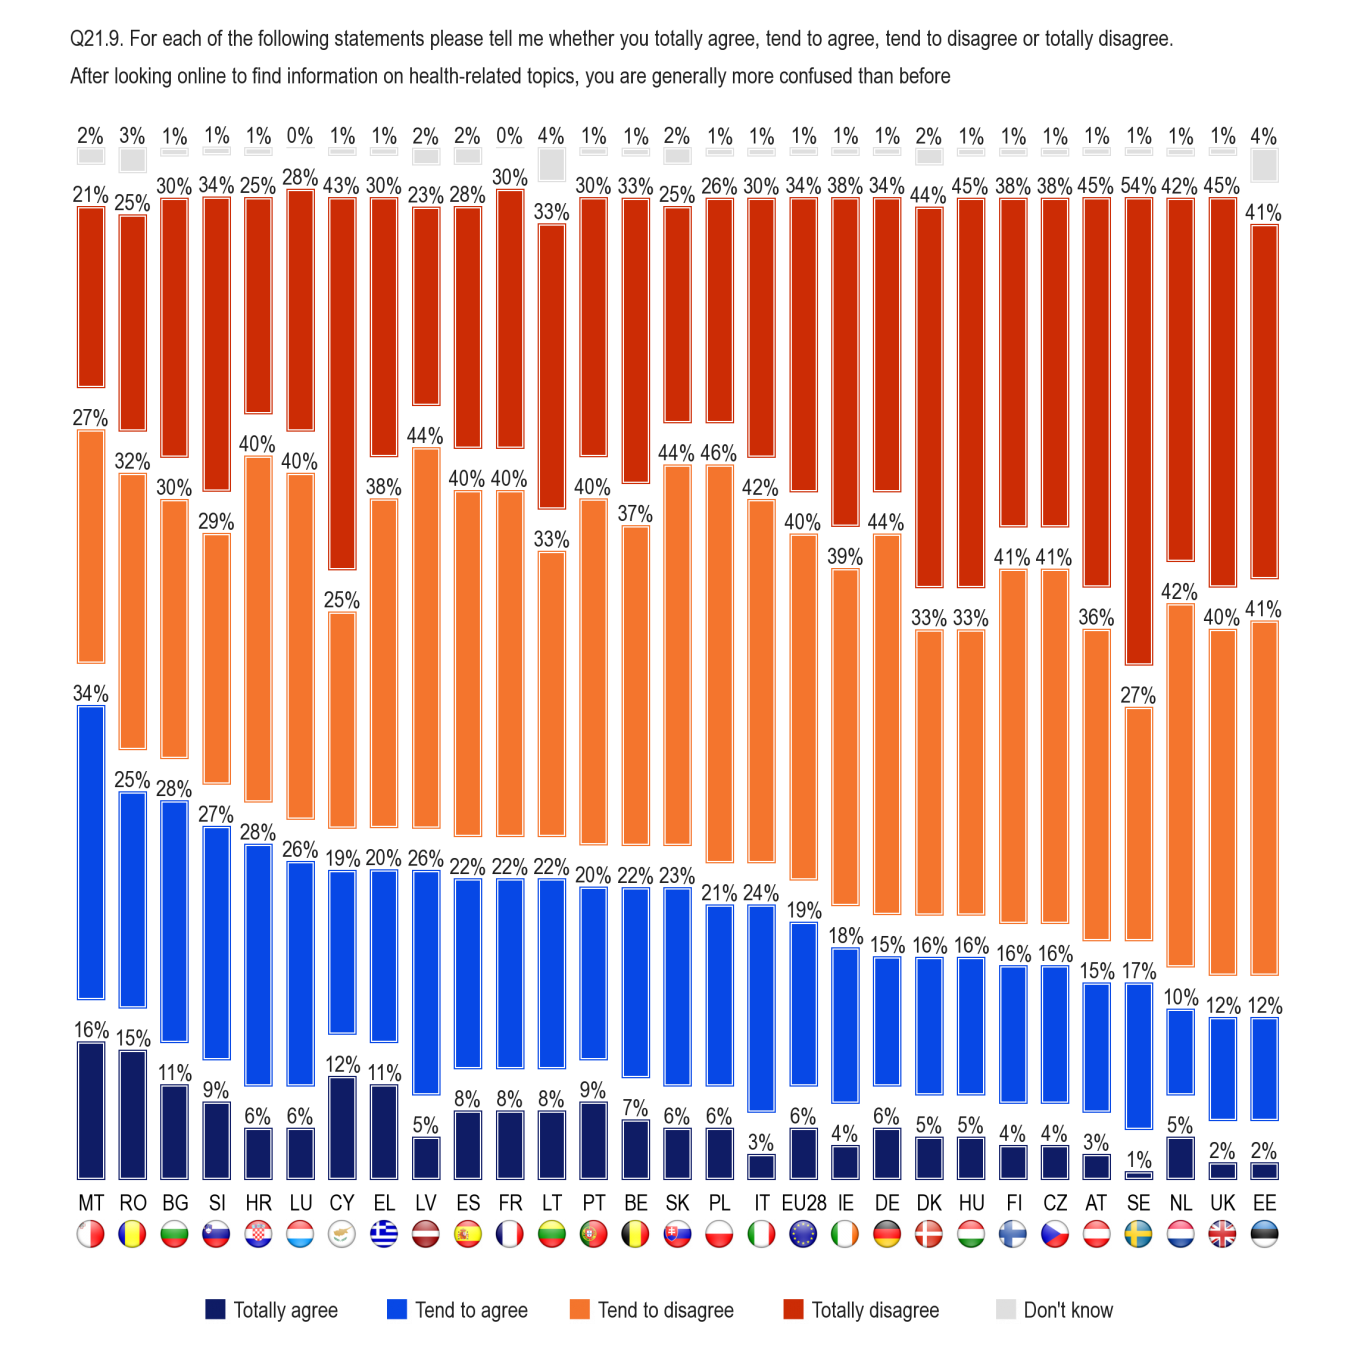 FLASH EUROBAROMETER Malta is the only country where more people agree (50%) than disagree (48%) that after looking online for health-related information, they generally feel more confused than before.